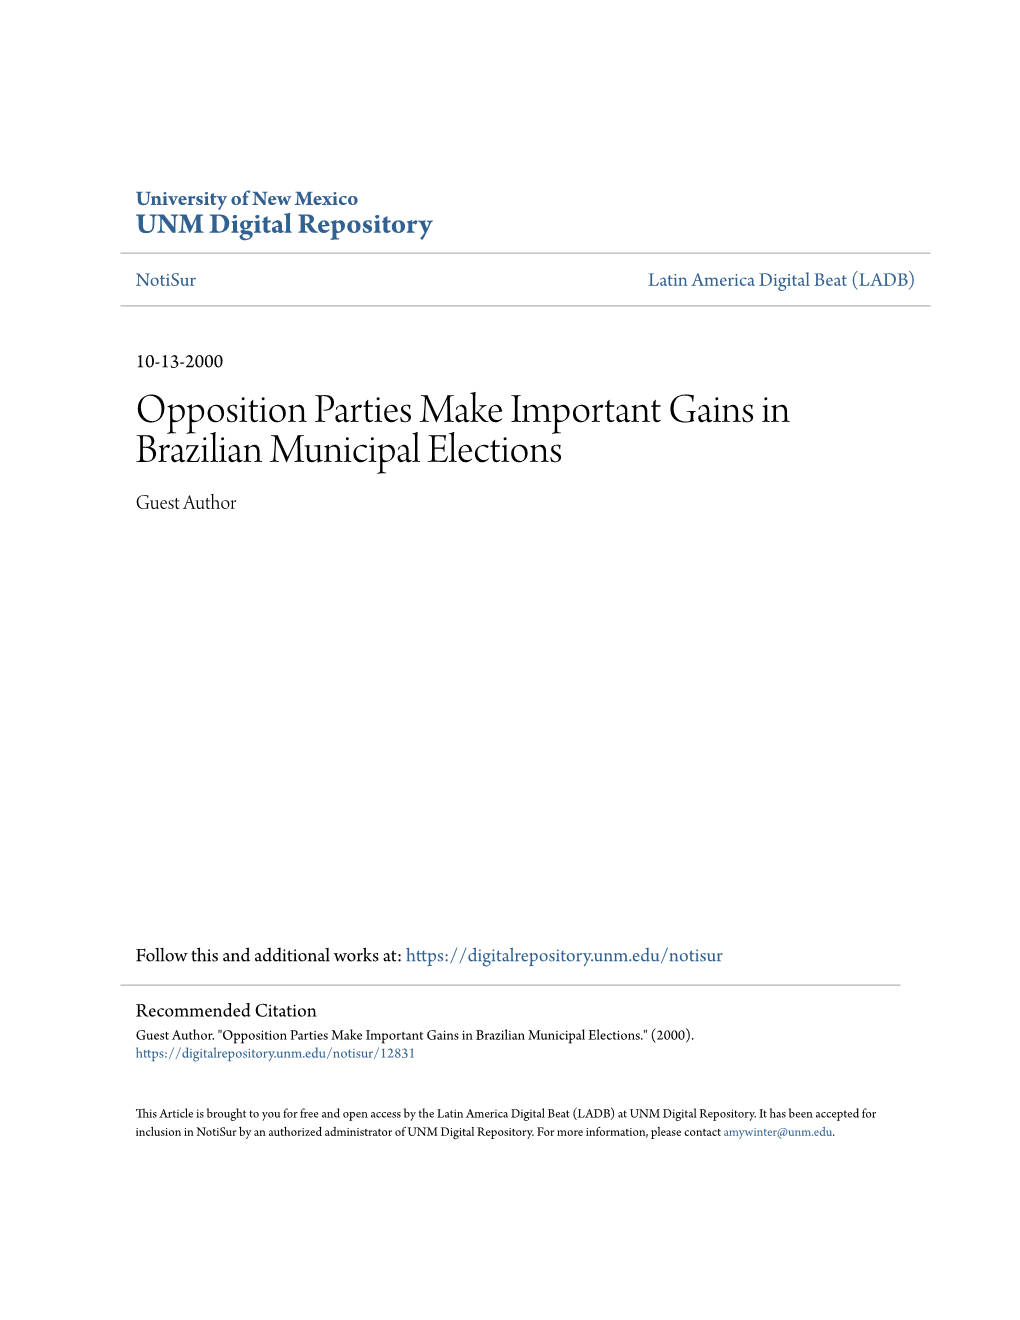 Opposition Parties Make Important Gains in Brazilian Municipal Elections Guest Author